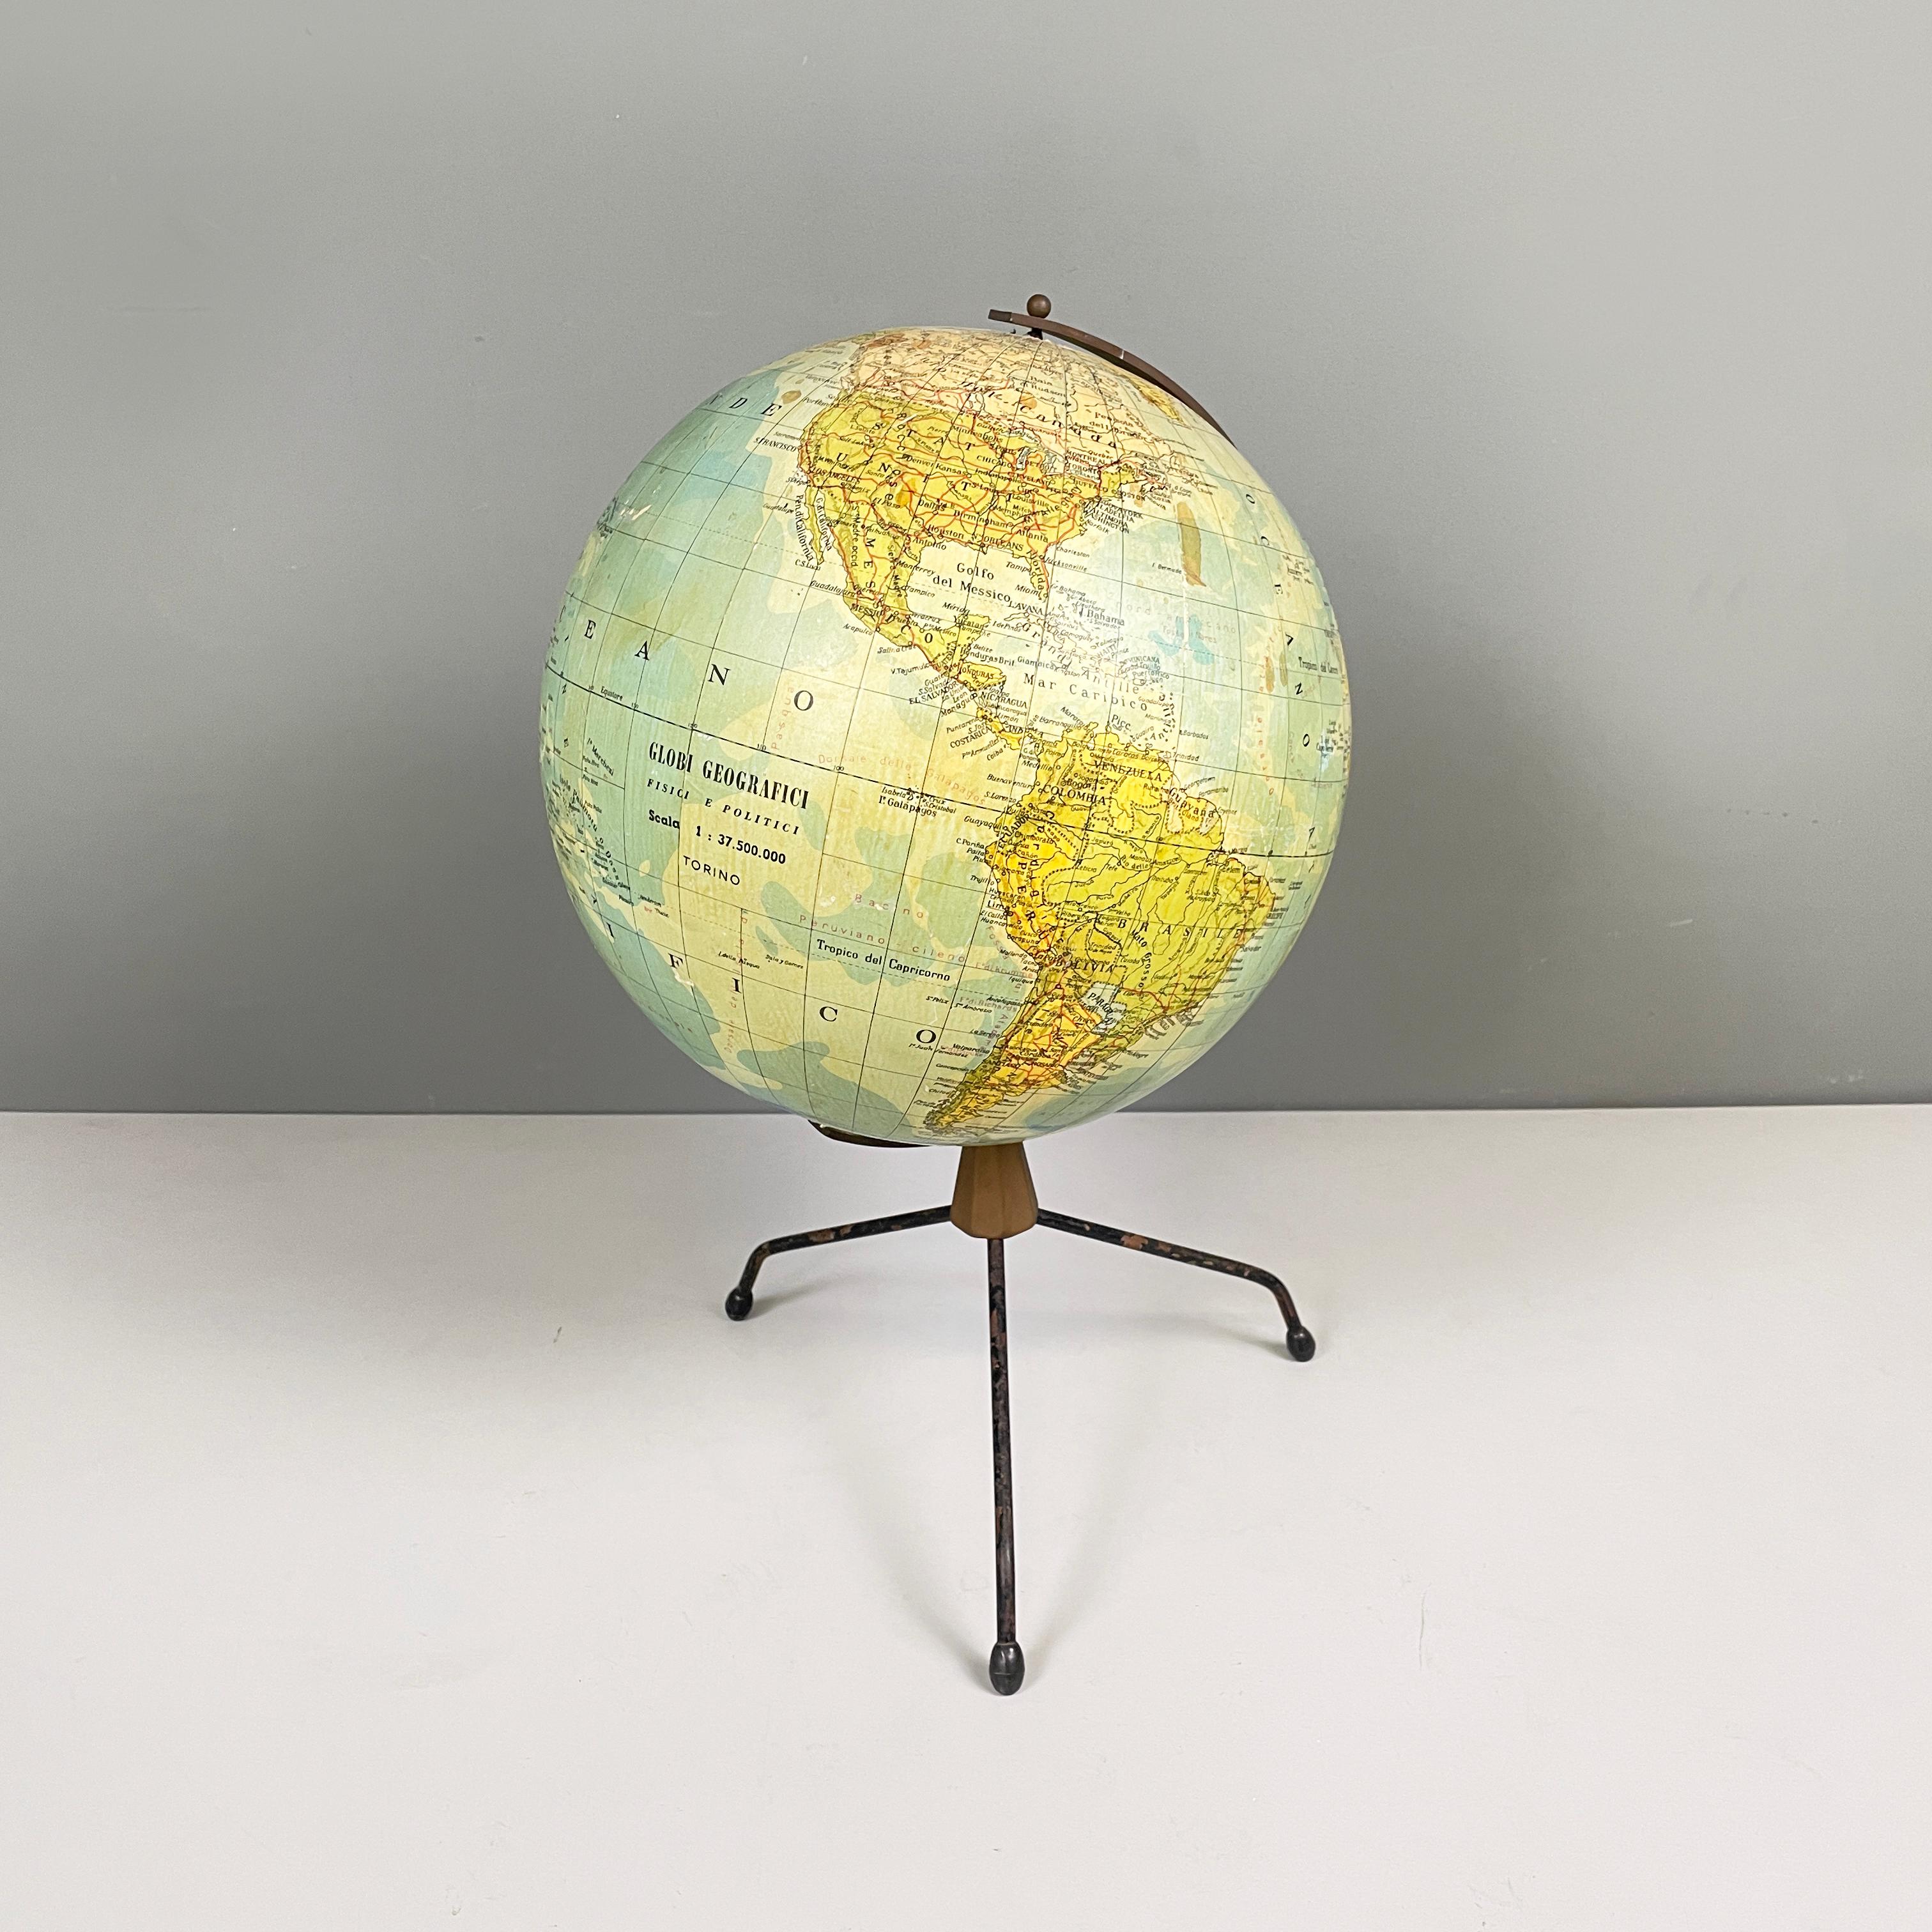 Italian modern Table globe map of the world in metal, 1960s
Table map of the world with metal structure. The globe rotates thanks to the pins of the curved metal structure. The base has 3 legs in black painted metal rod with oval feet.
1960